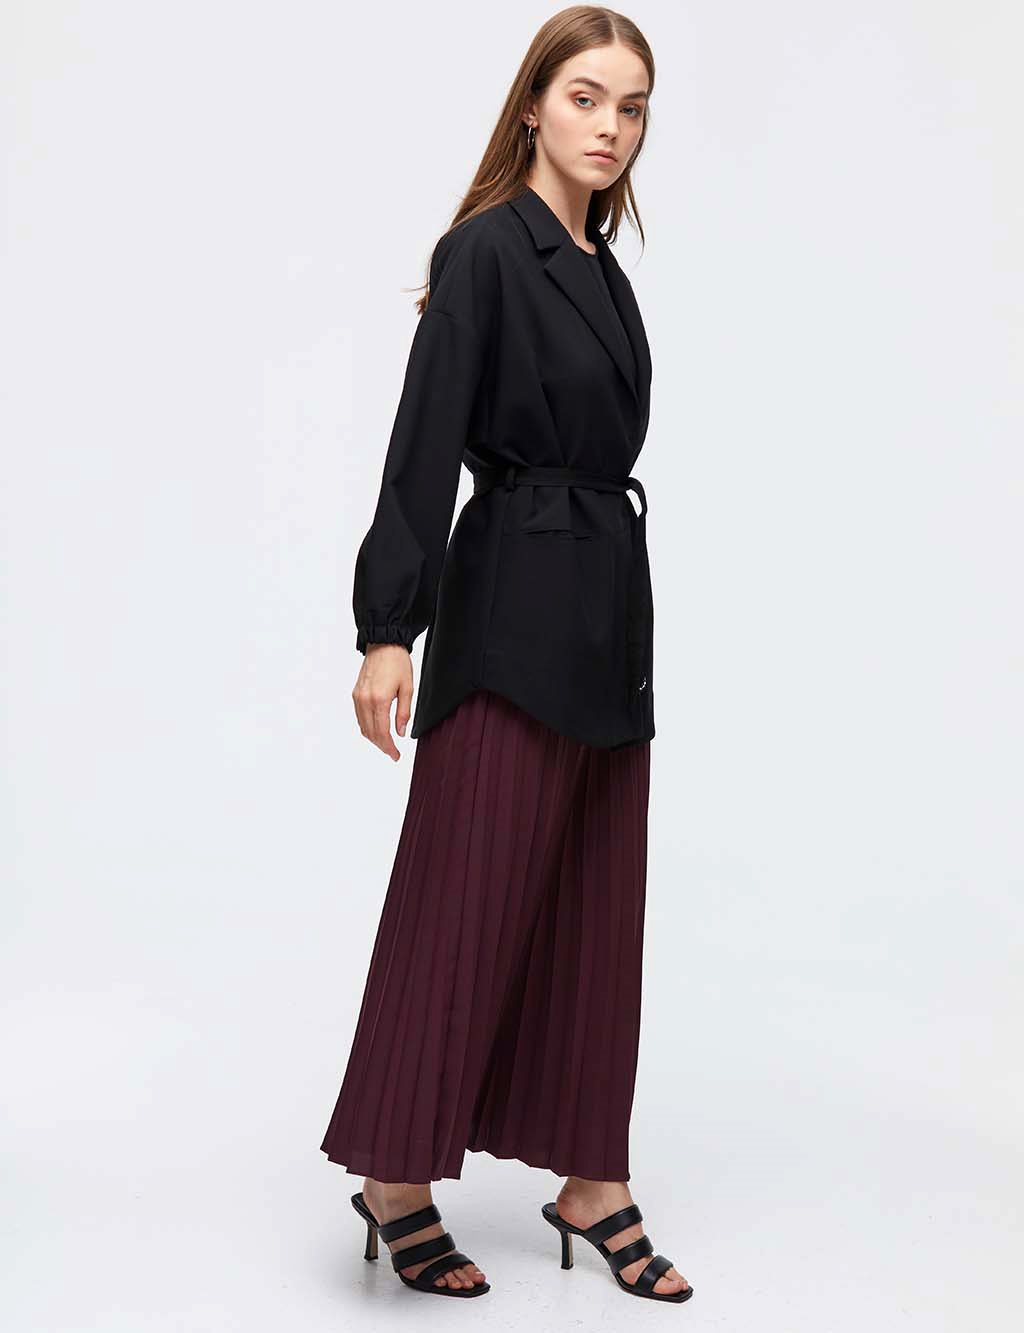 Pleated A-line Skirt A21 12032 Claret Red - Kayra.com